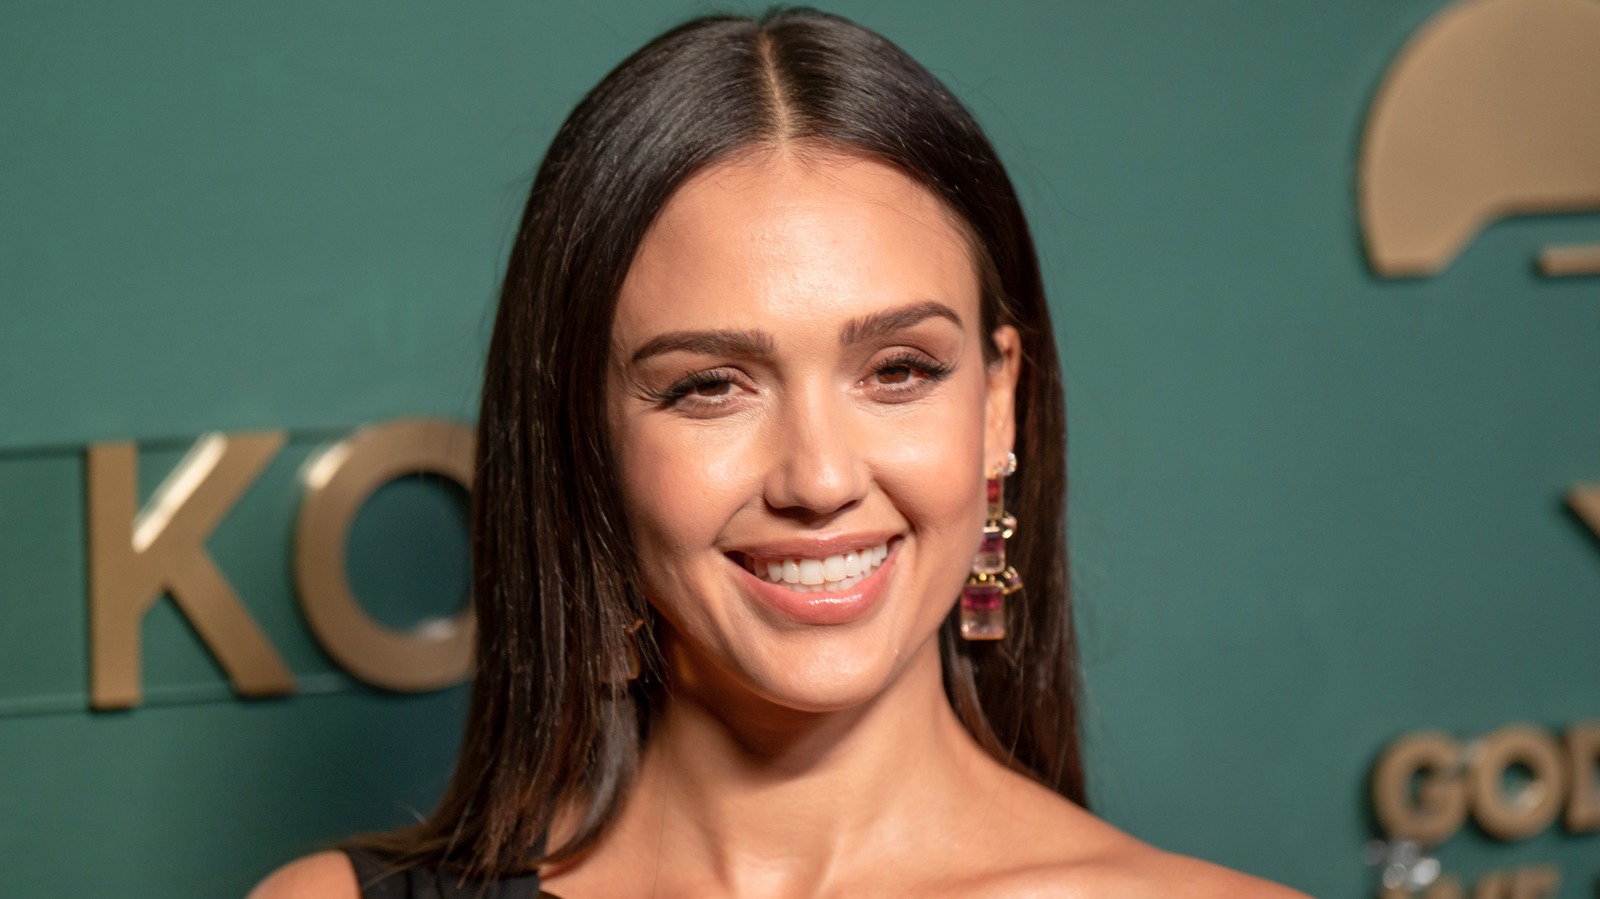 Jessica Alba Explains The Best Way To Hang String Lights For An 'Adult ...